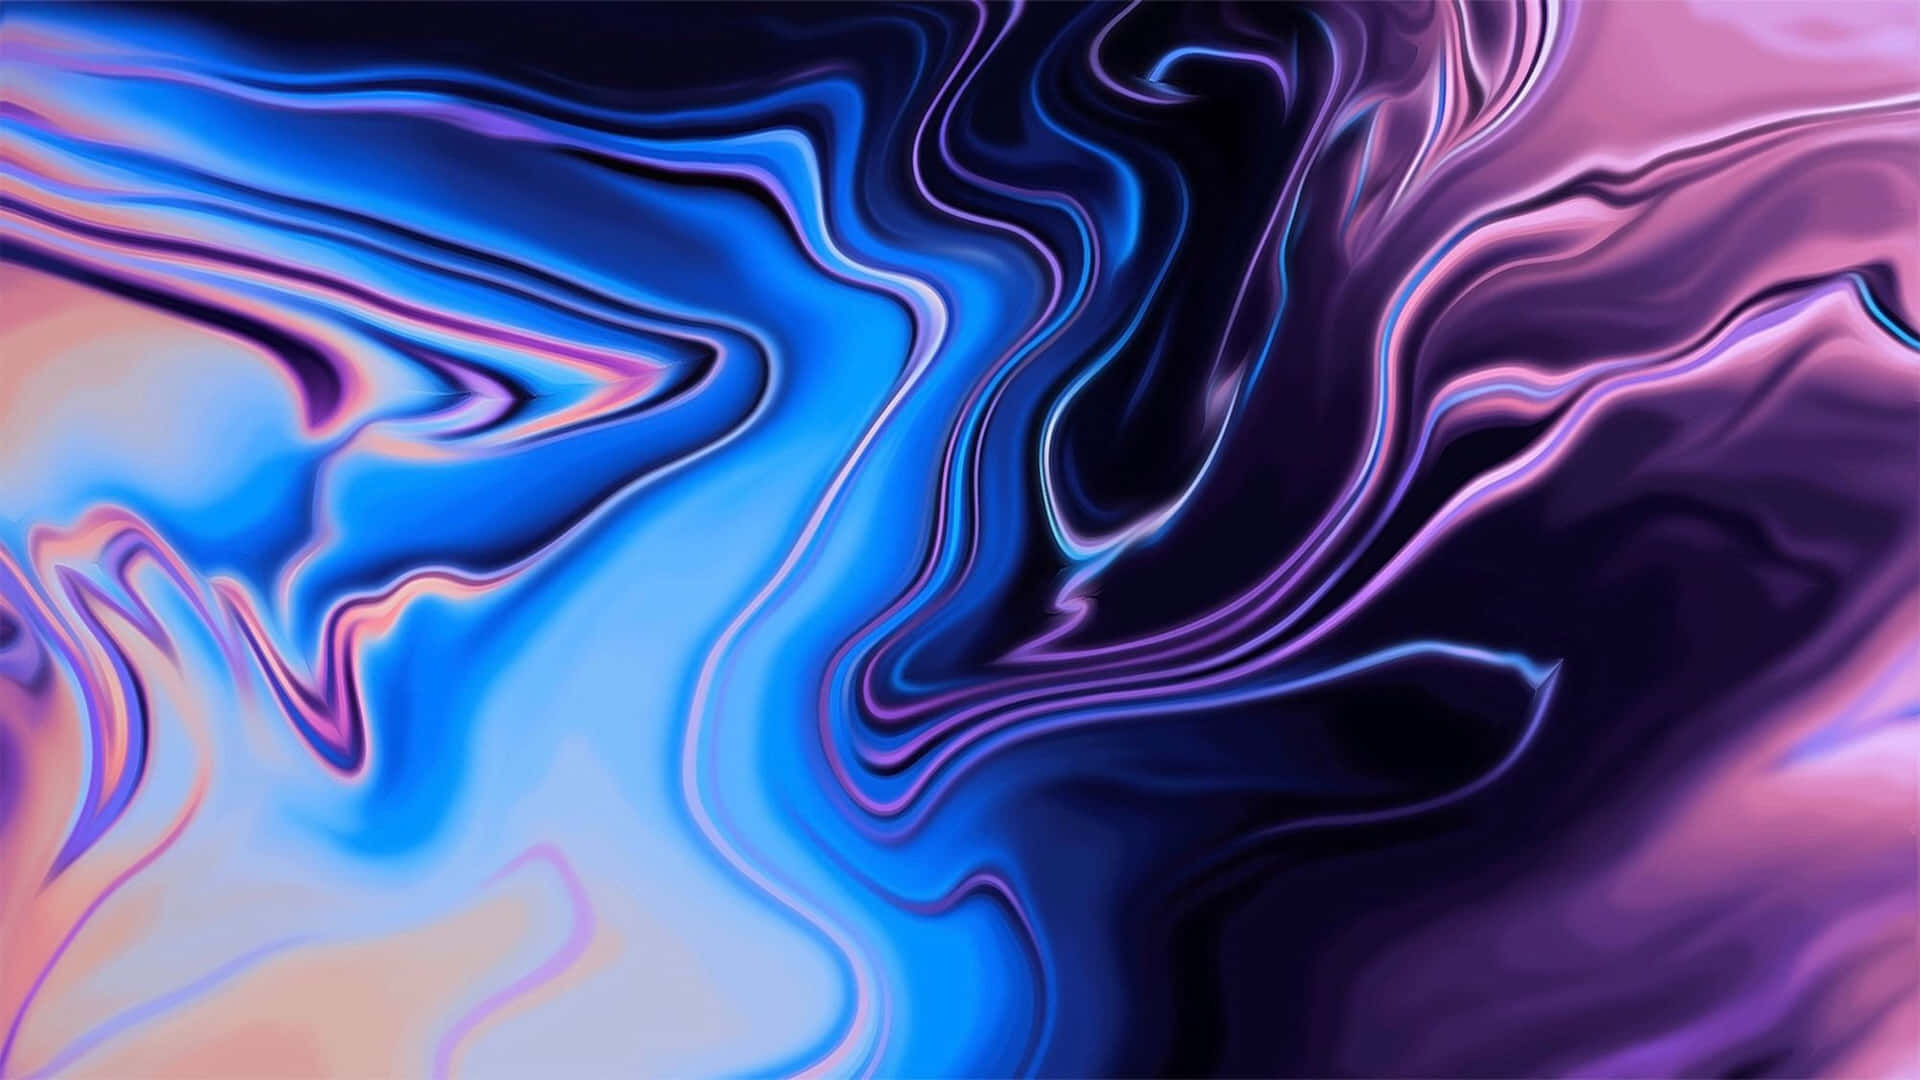 A Purple And Blue Abstract Painting Wallpaper